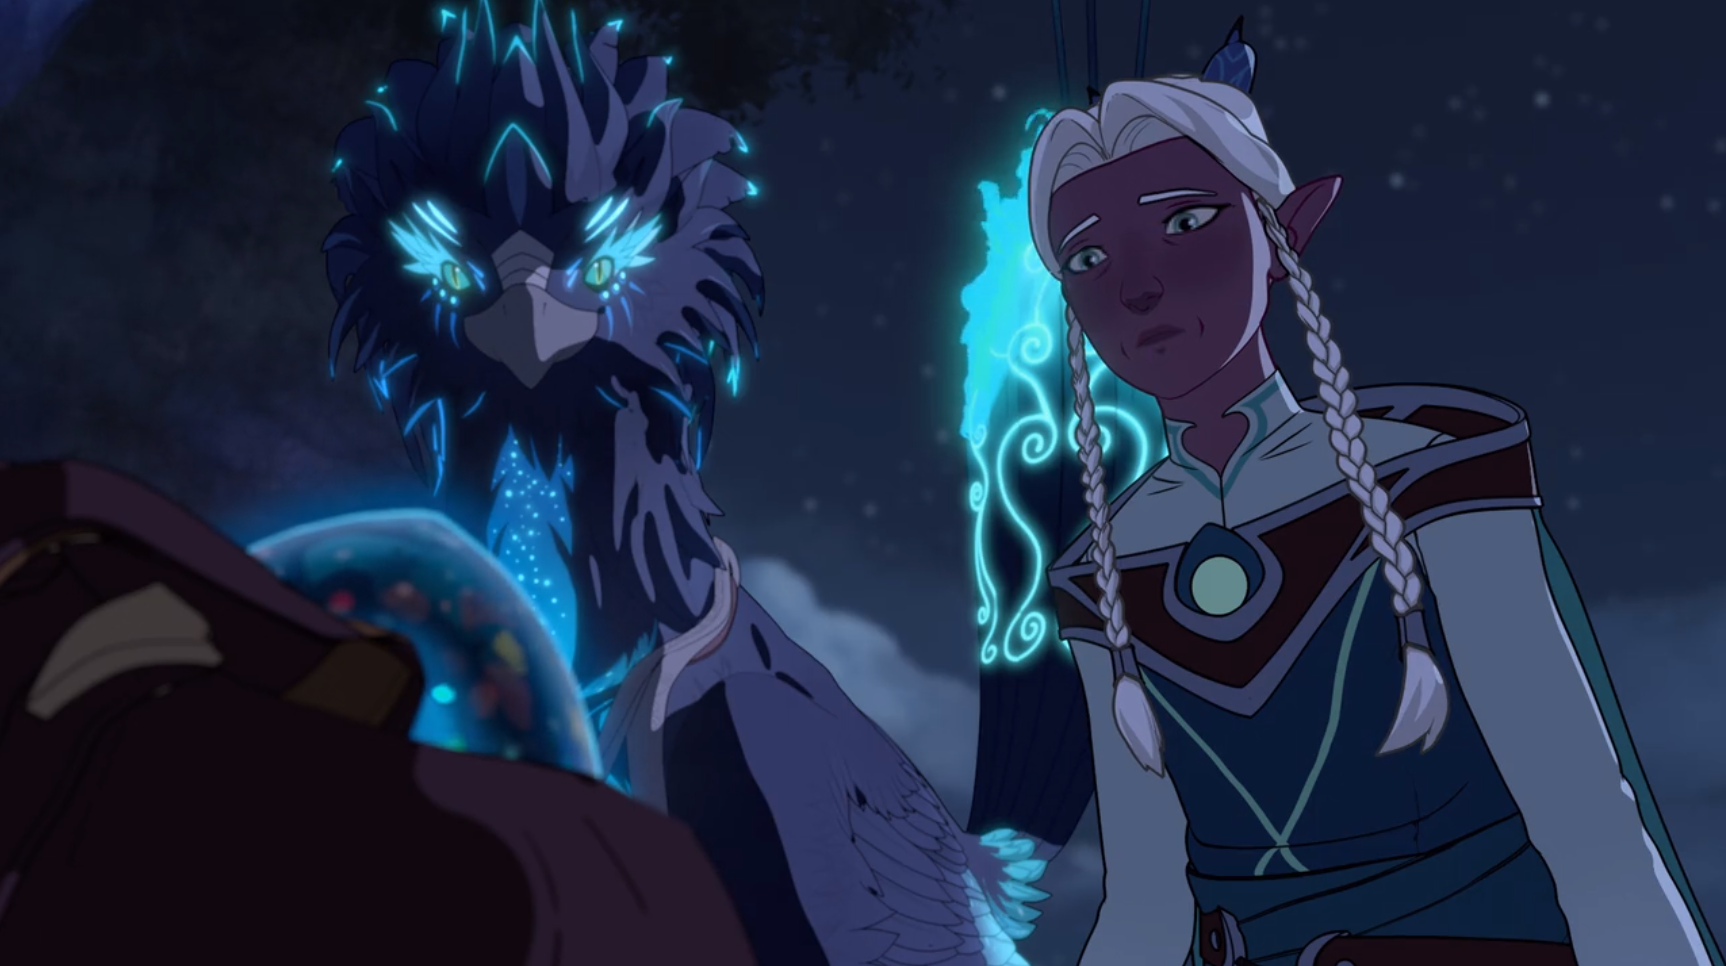 A Moonshadow elf and her blue phoenix look concerned over a glowing egg.